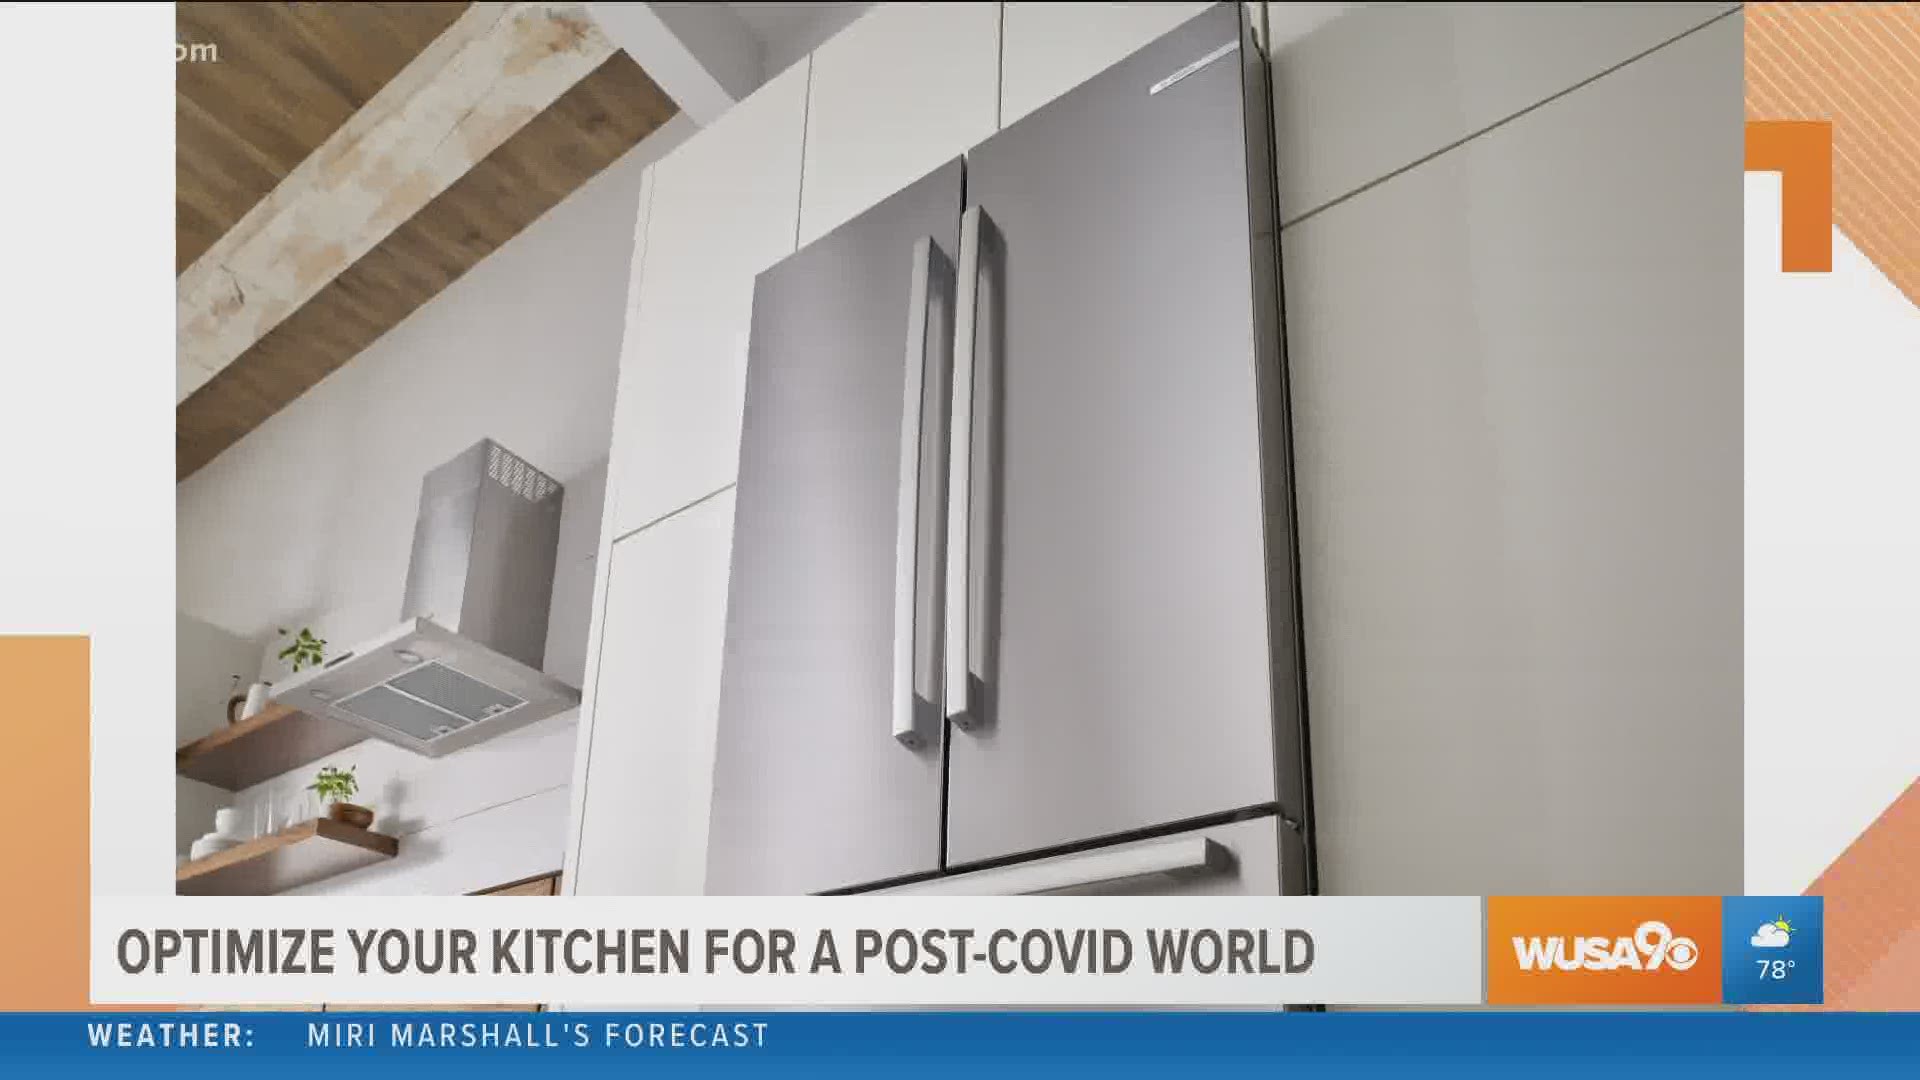 Tips on how to optimize your kitchen space with the latest appliances from Jessica Petrino of AJ Madison.